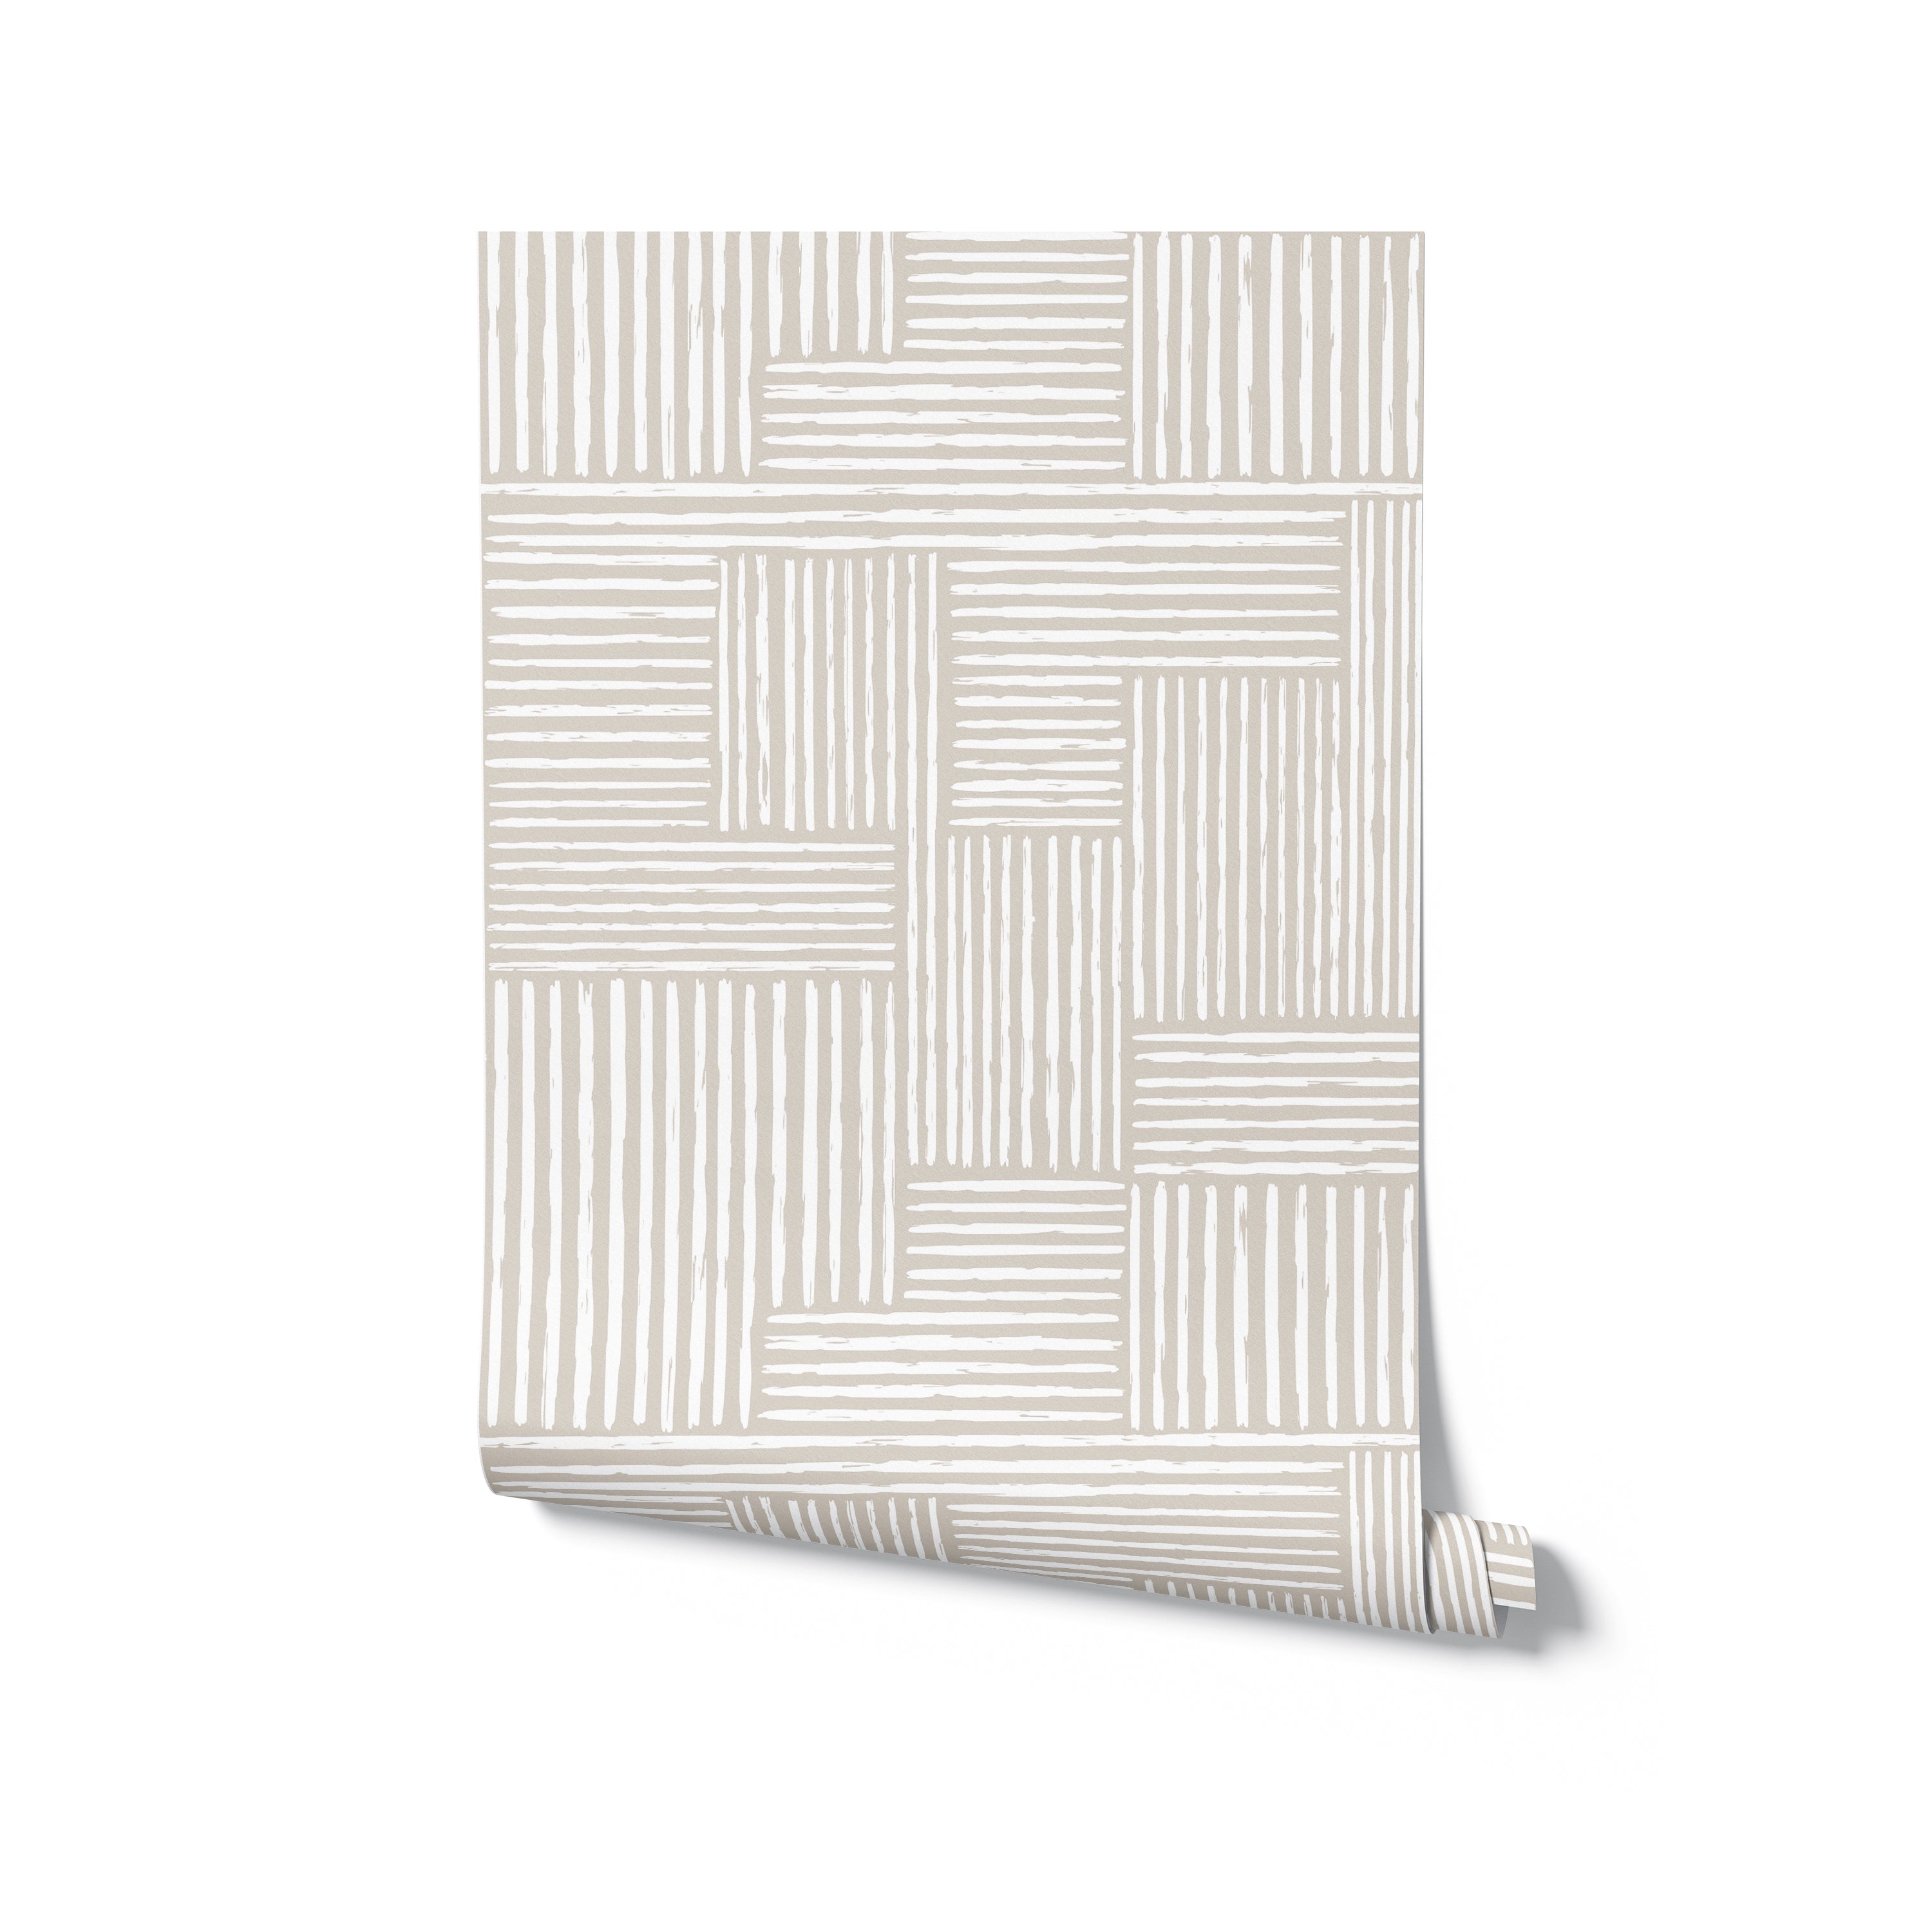 A rolled-up piece of Neutral Geometric Wallpaper, displaying the repeated pattern of structured lines forming geometric shapes in beige tones on a crisp white background, suggesting a clean and contemporary aesthetic